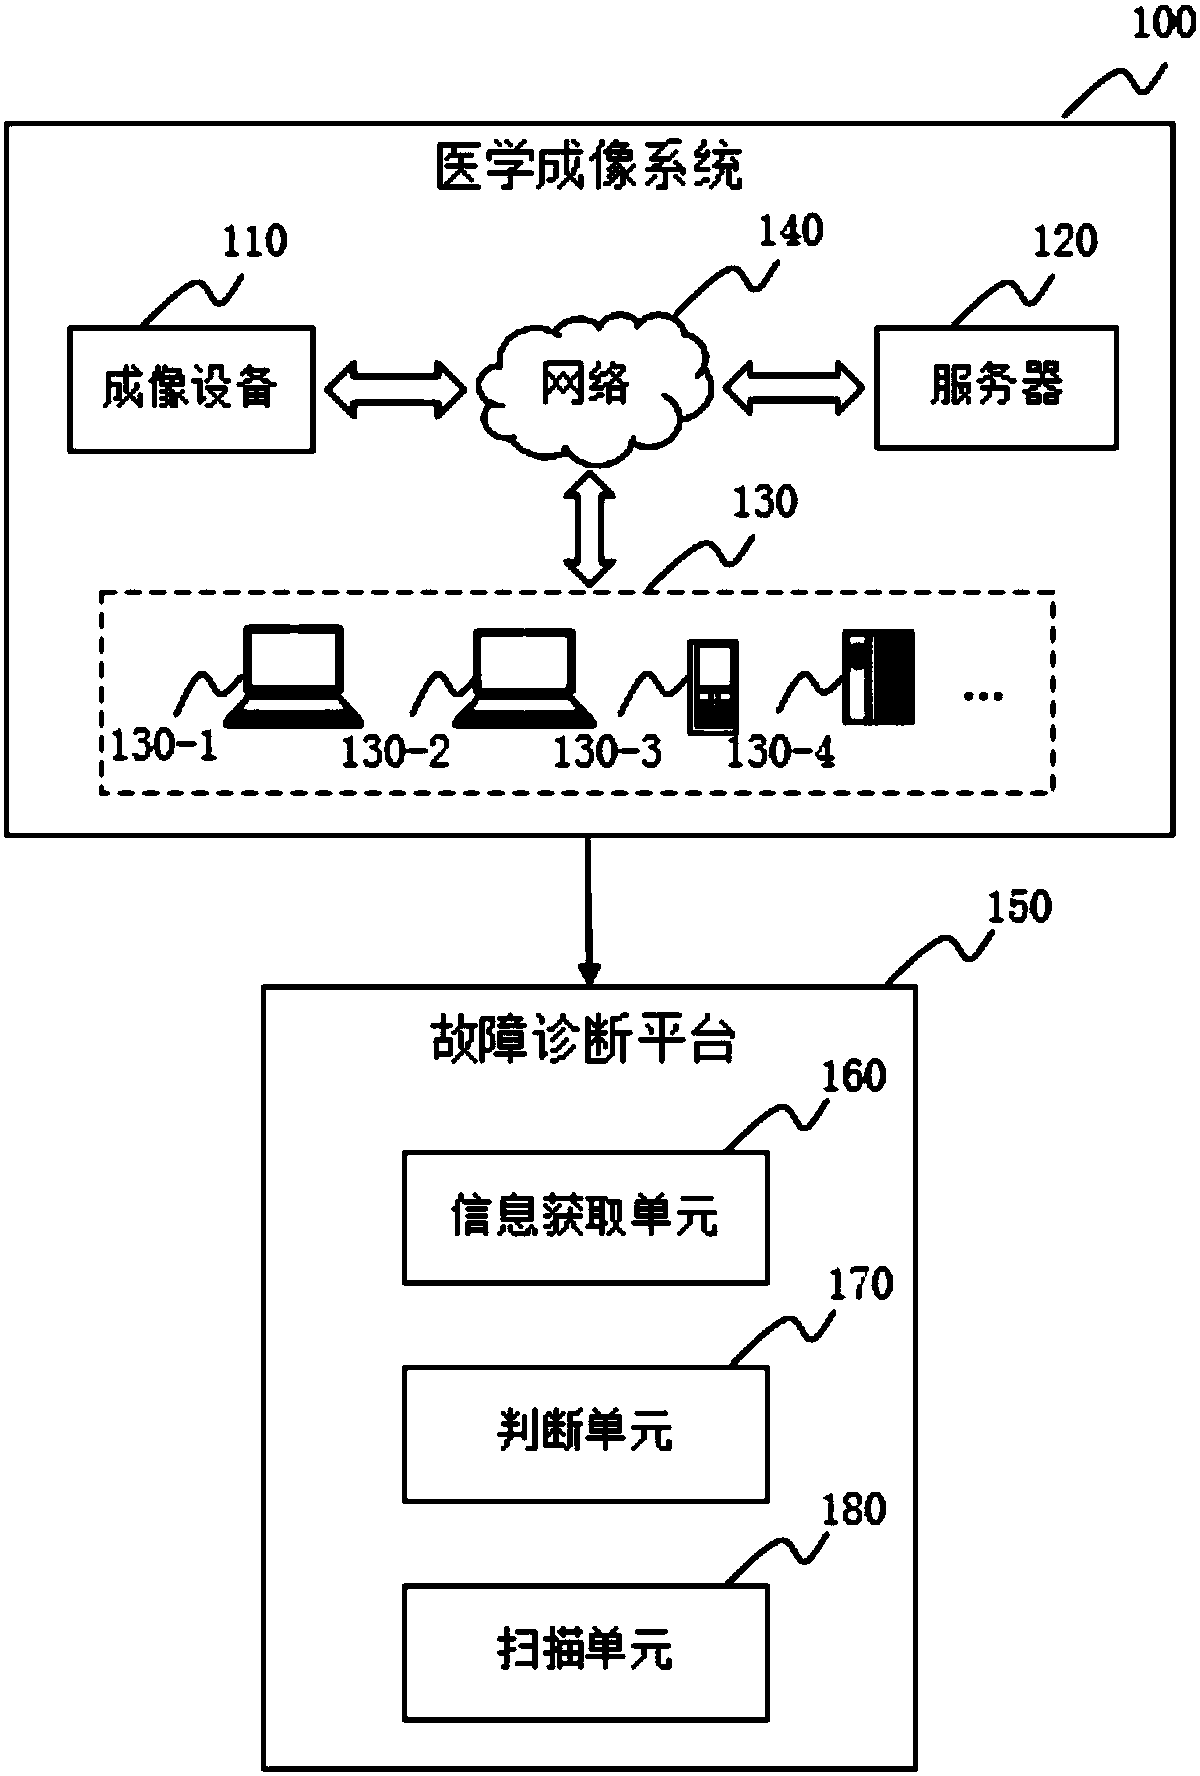 Imaging system and scanning method thereof